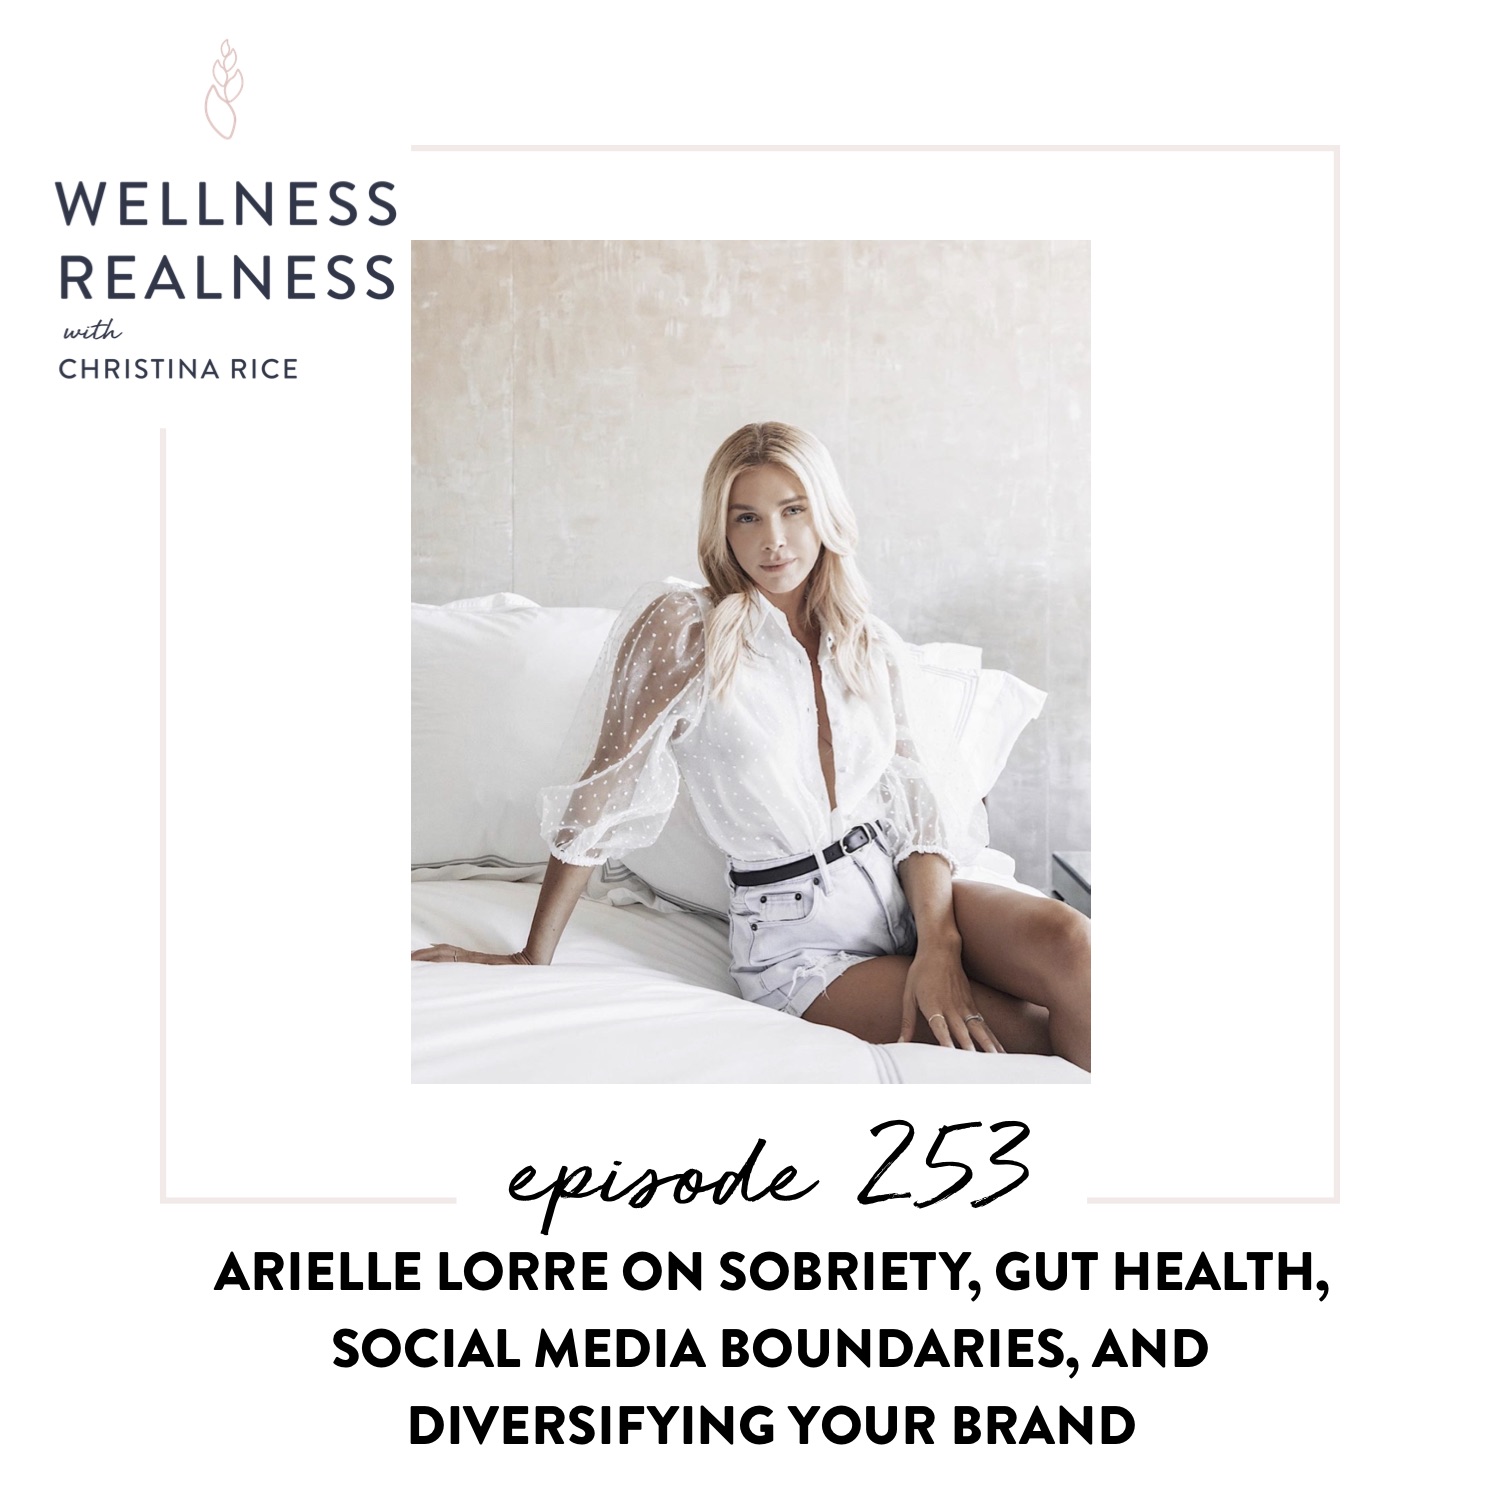 253: Arielle Lorre on Sobriety, Gut Health, Social Media Boundaries, and Diversifying Your Brand